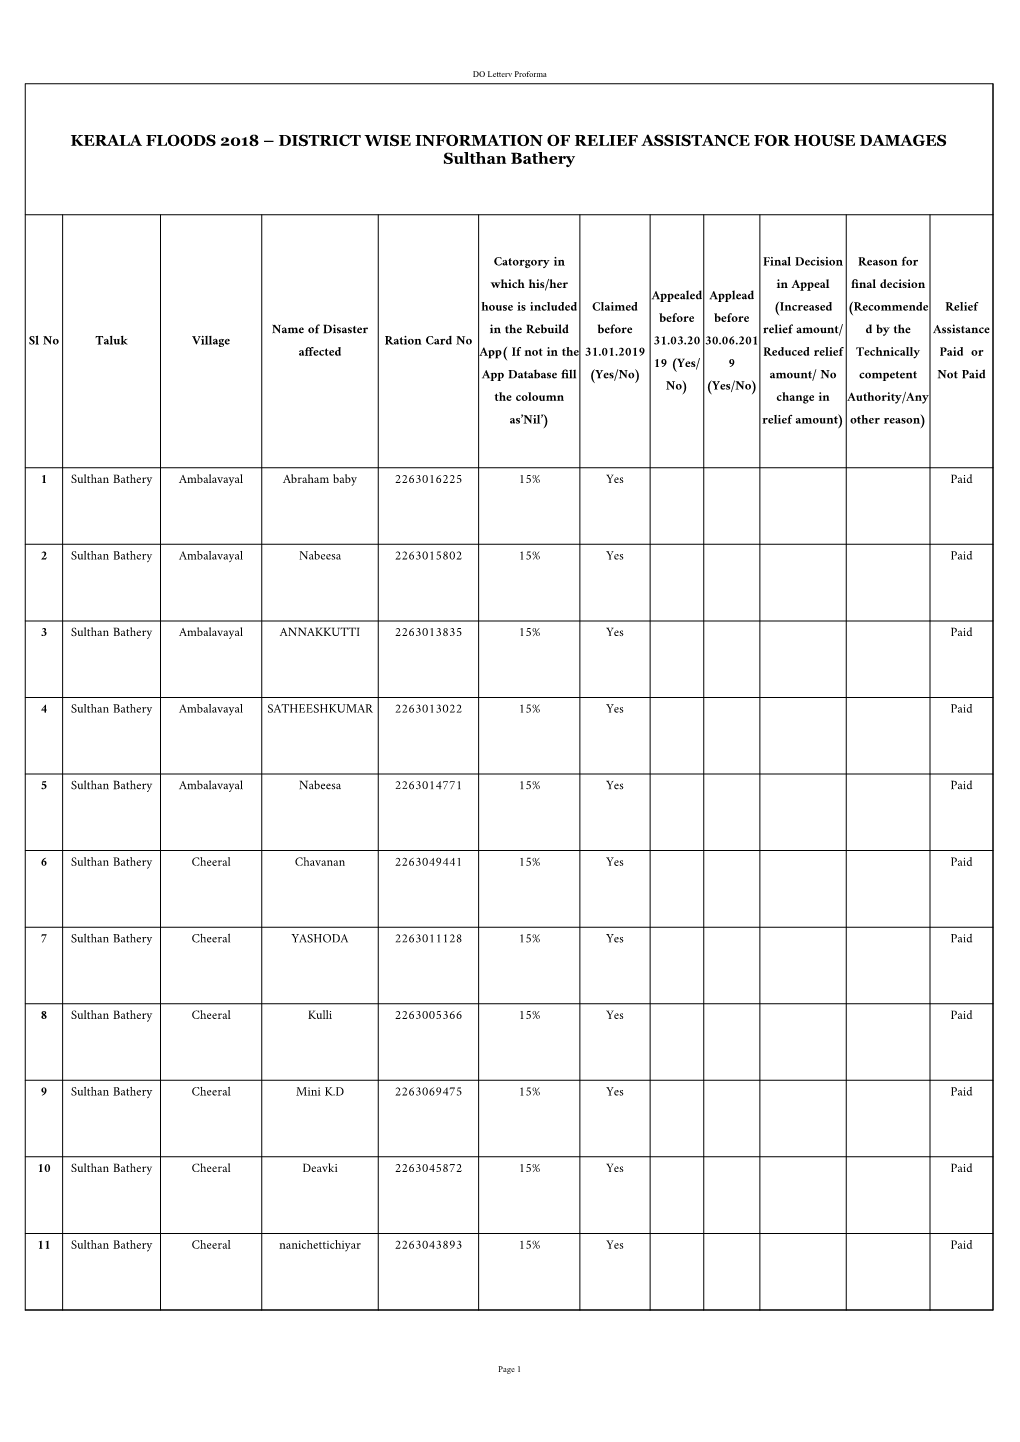 KERALA FLOODS 2018 – DISTRICT WISE INFORMATION of RELIEF ASSISTANCE for HOUSE DAMAGES Sulthan Bathery